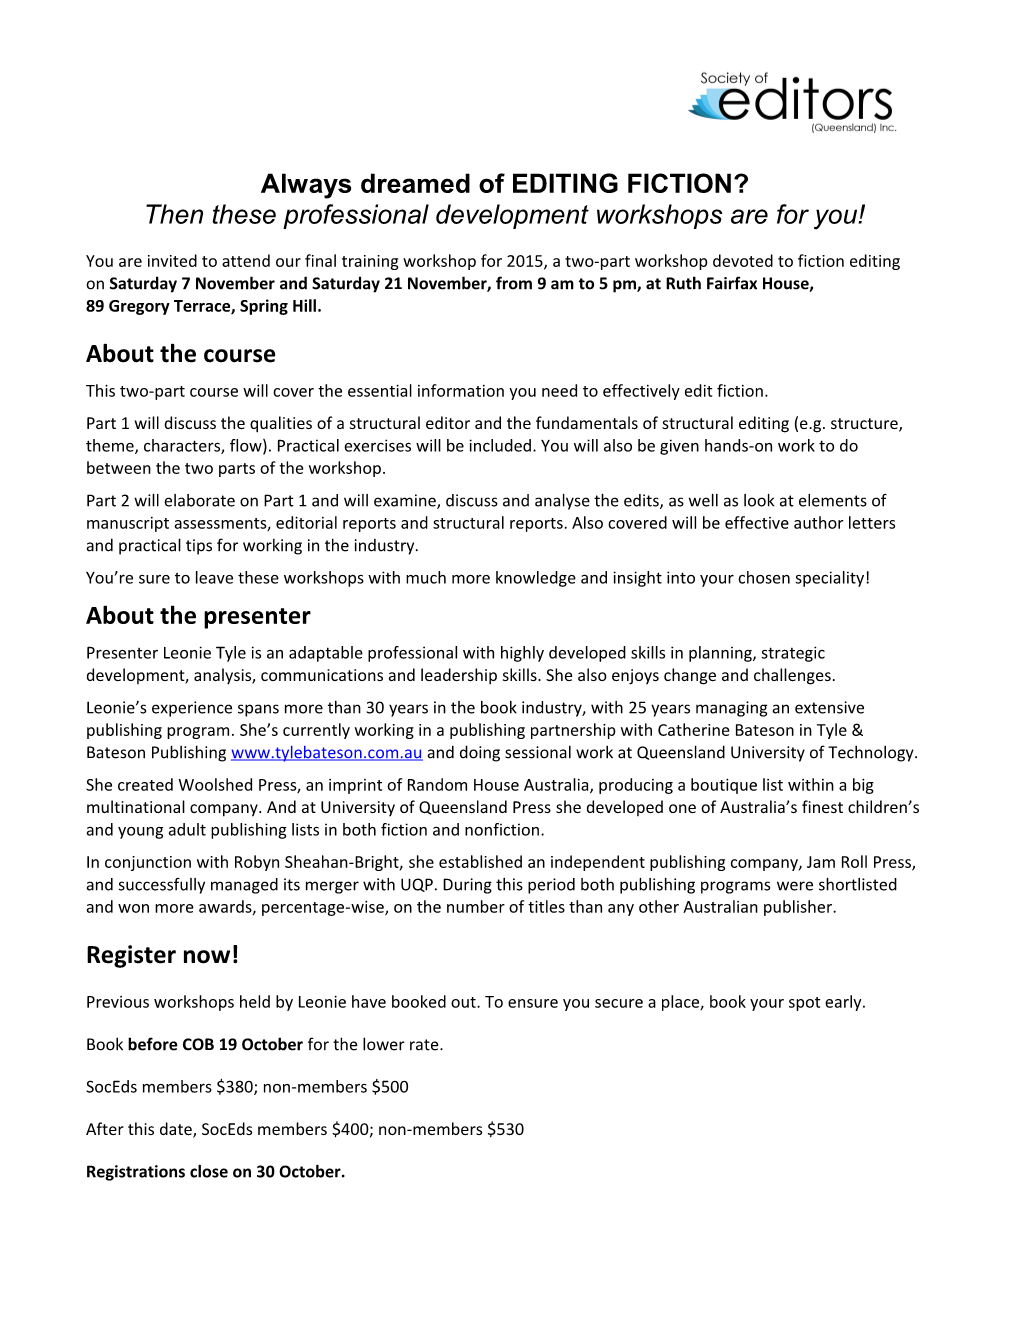 Always Dreamed of EDITING FICTION?